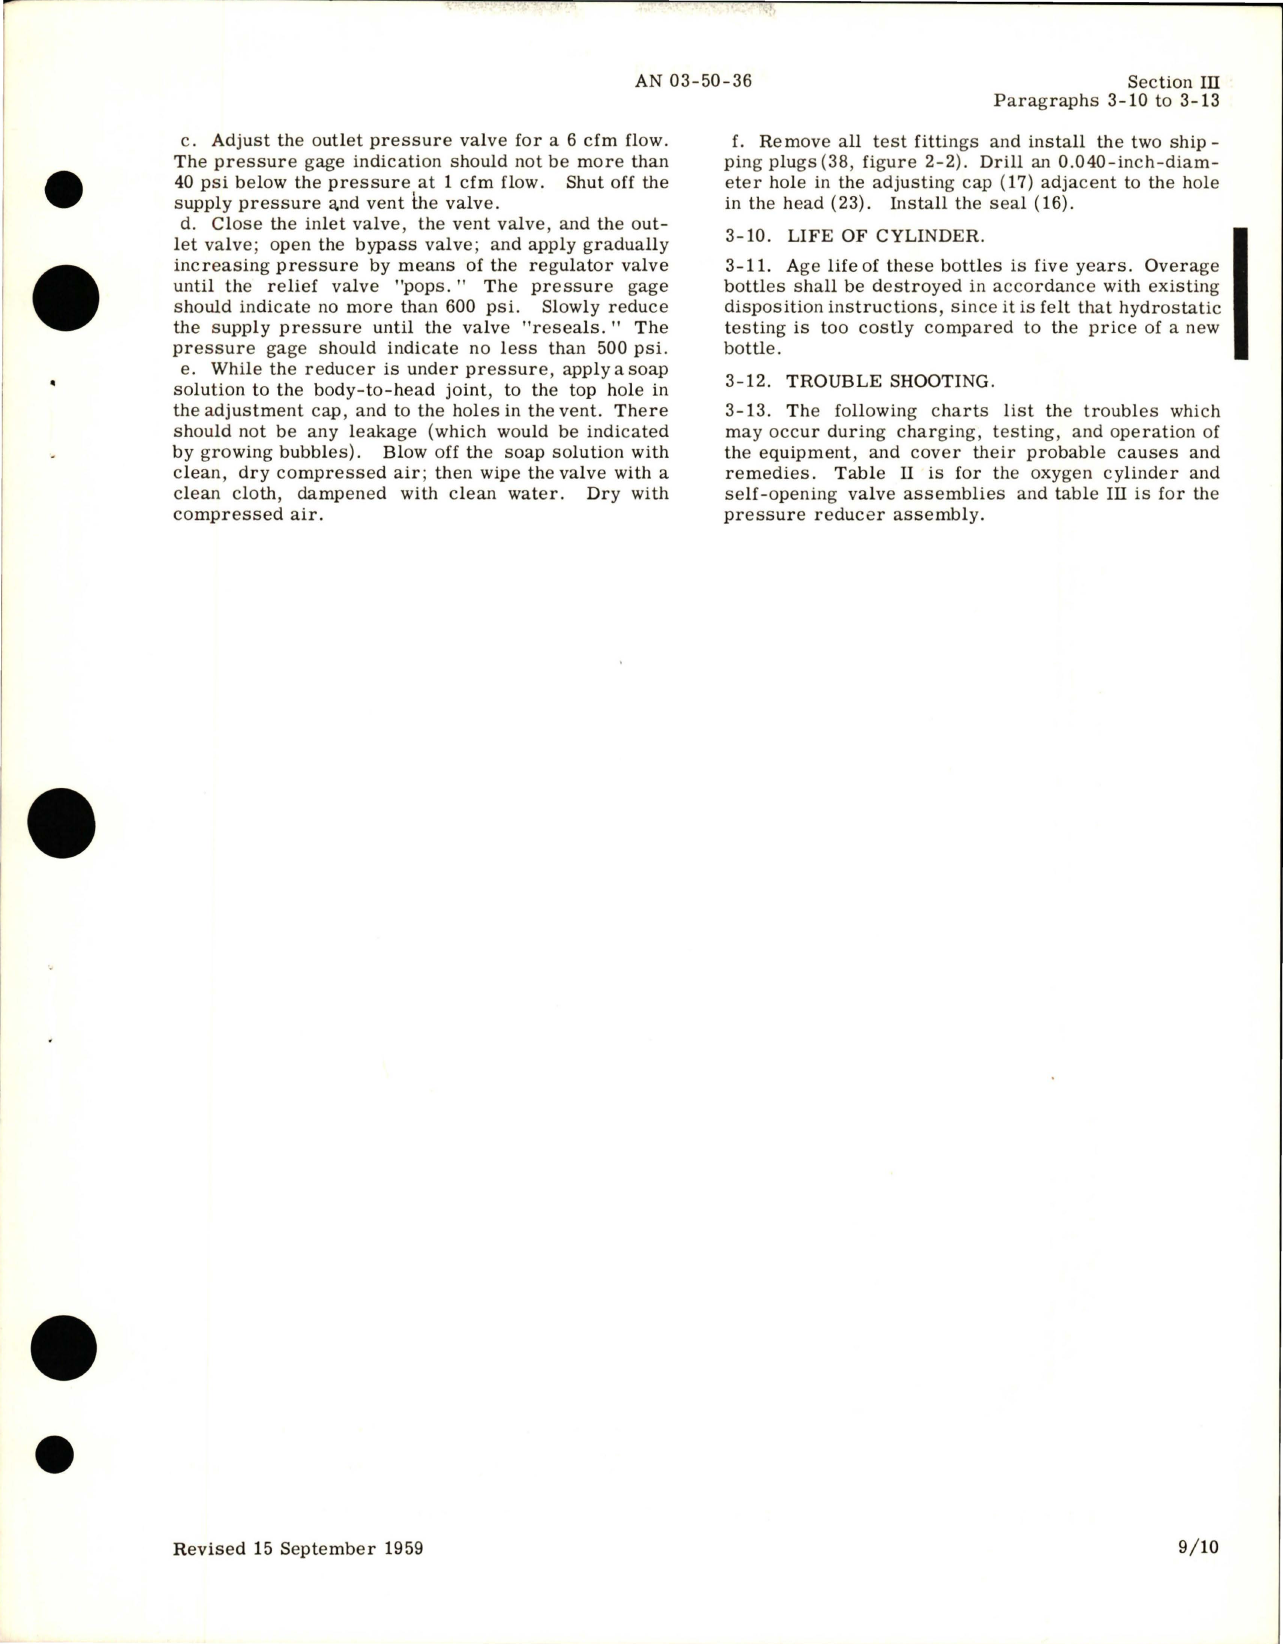 Sample page 5 from AirCorps Library document: Overhaul Instructions for Oxygen Cylinder, Self-Opening Valve, and Pressure Reducer Assembly